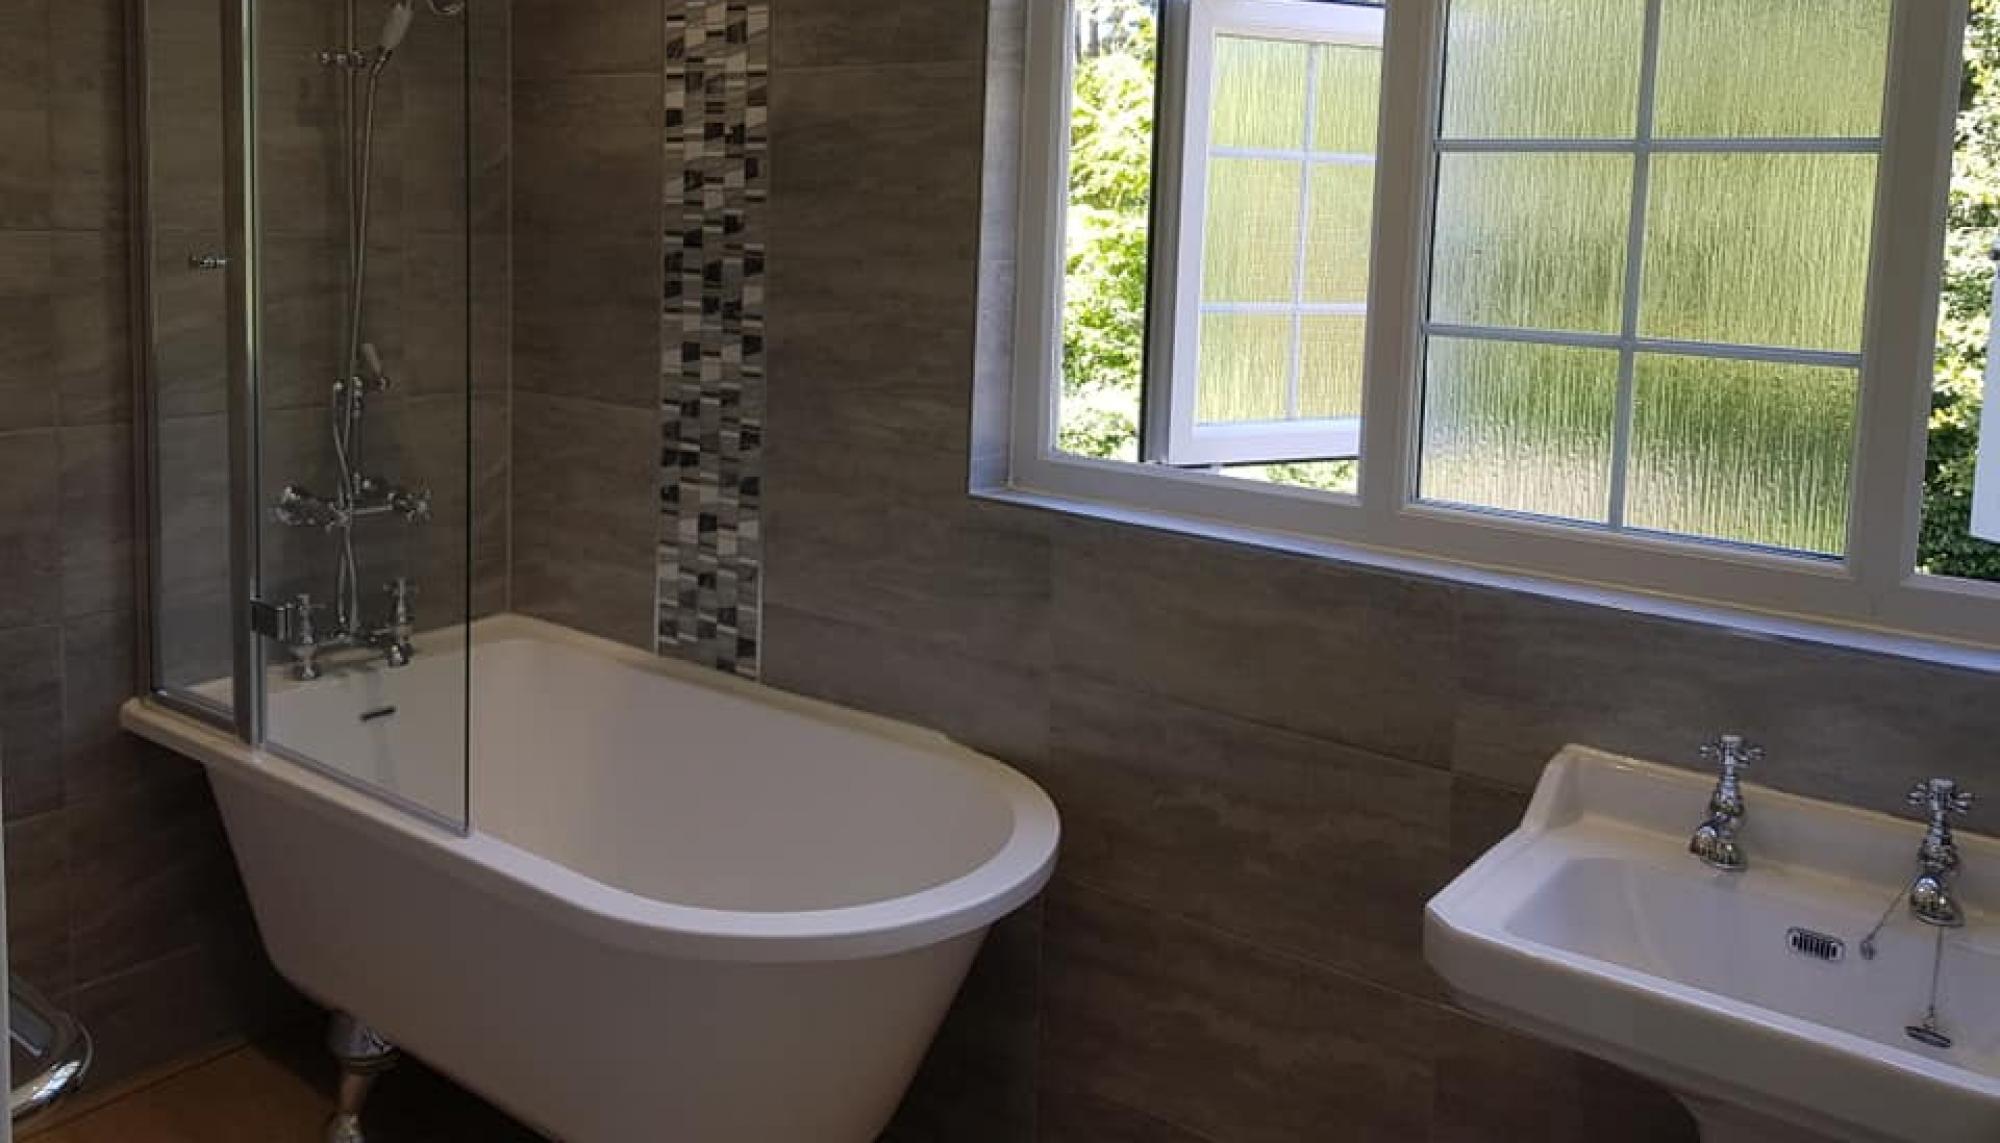 Bathroom Installations for Wirral and Chester - Bathroom Ensuite Wetroom Neston Wirral Merseyside Chester